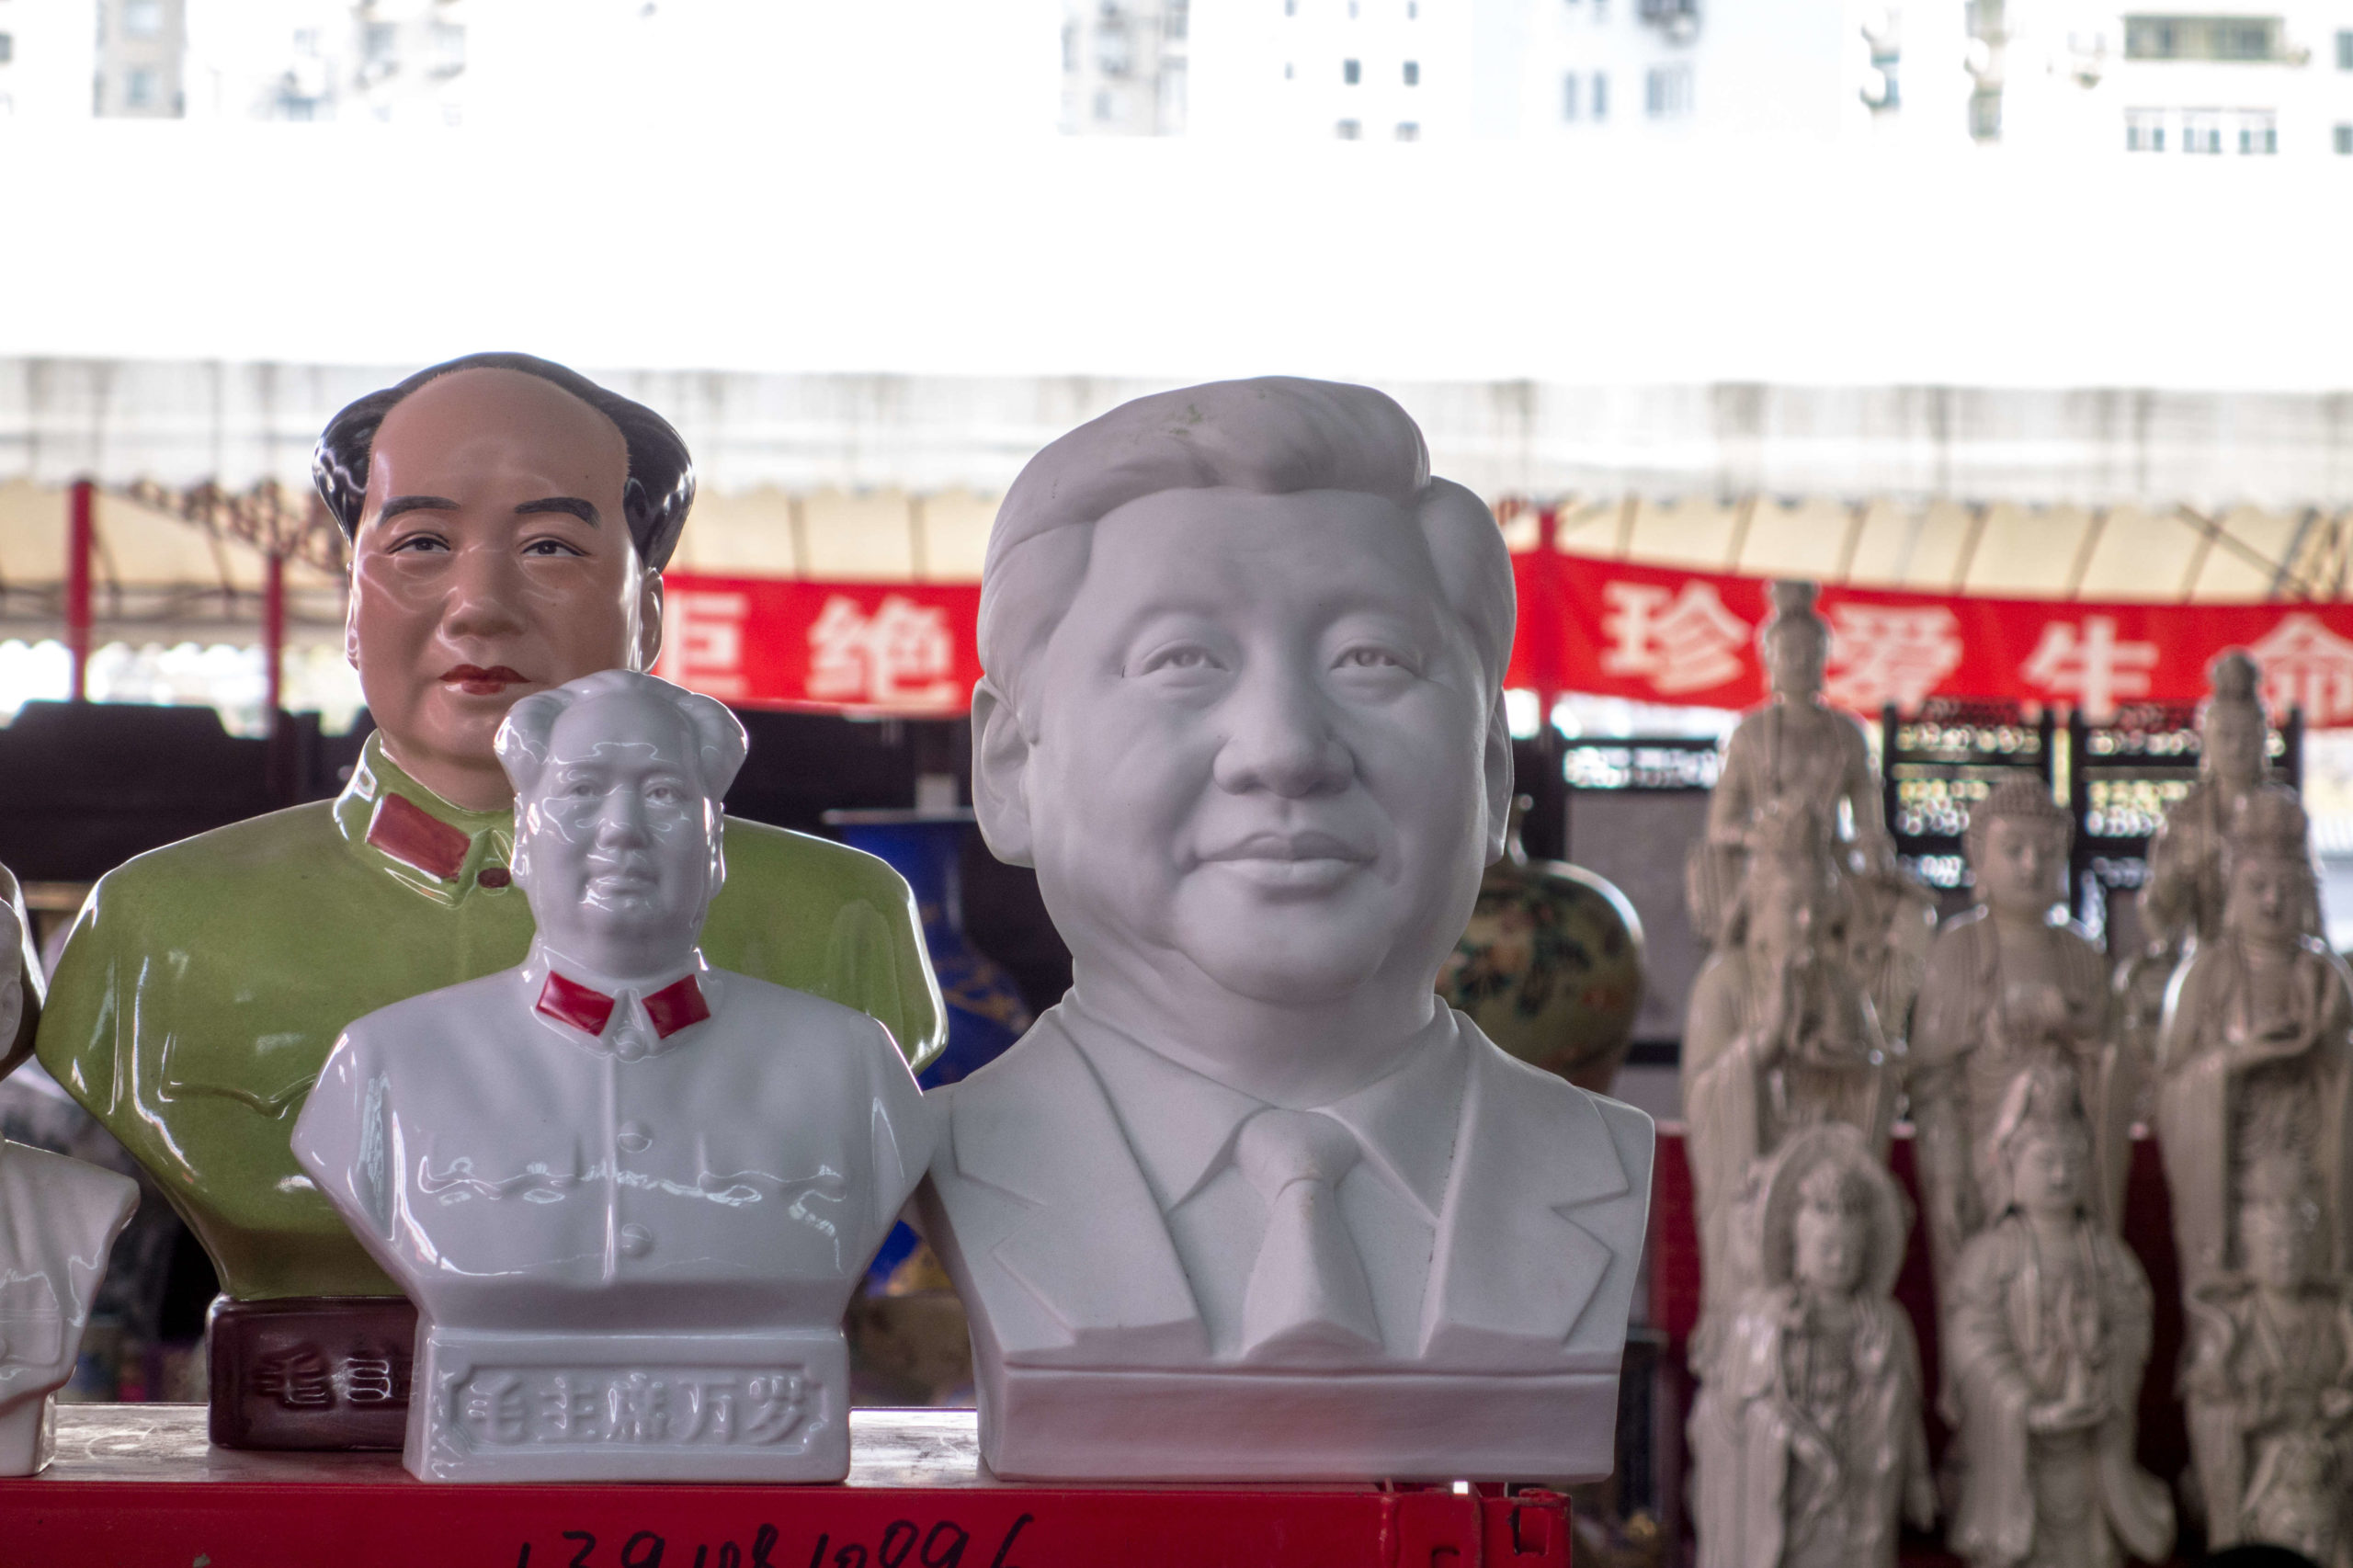 Porcelain statue of Mao Zedong and Xi Jinping on a stall.